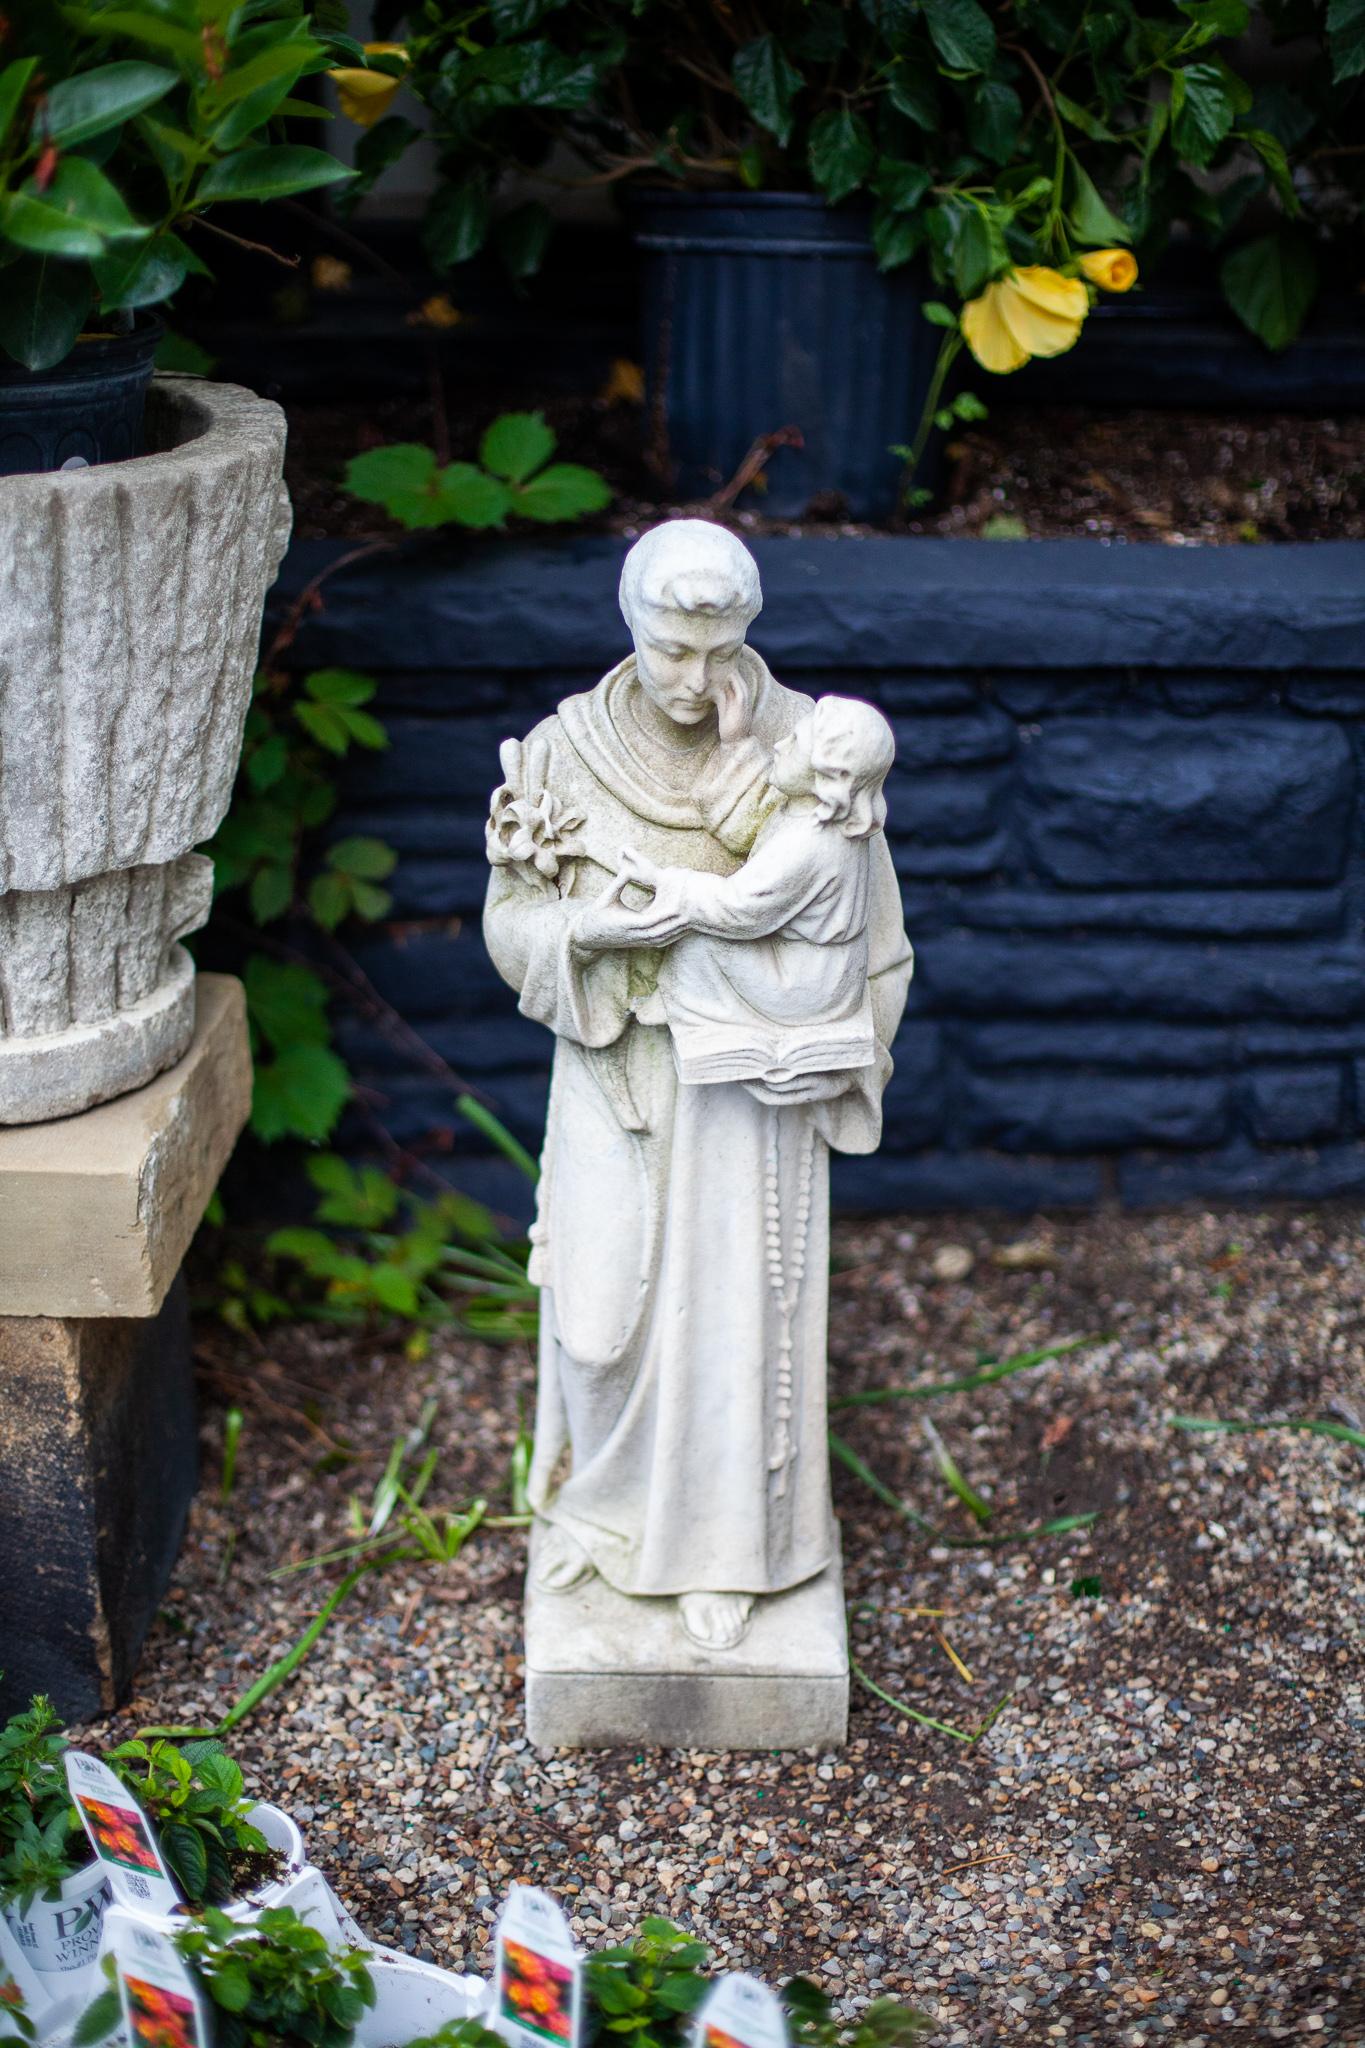 A wonderful ecclesiastical statue with a worn patina due to age. Perfect for the home or garden, fleurdetroit proudly offers up this marvelous decorative statue.